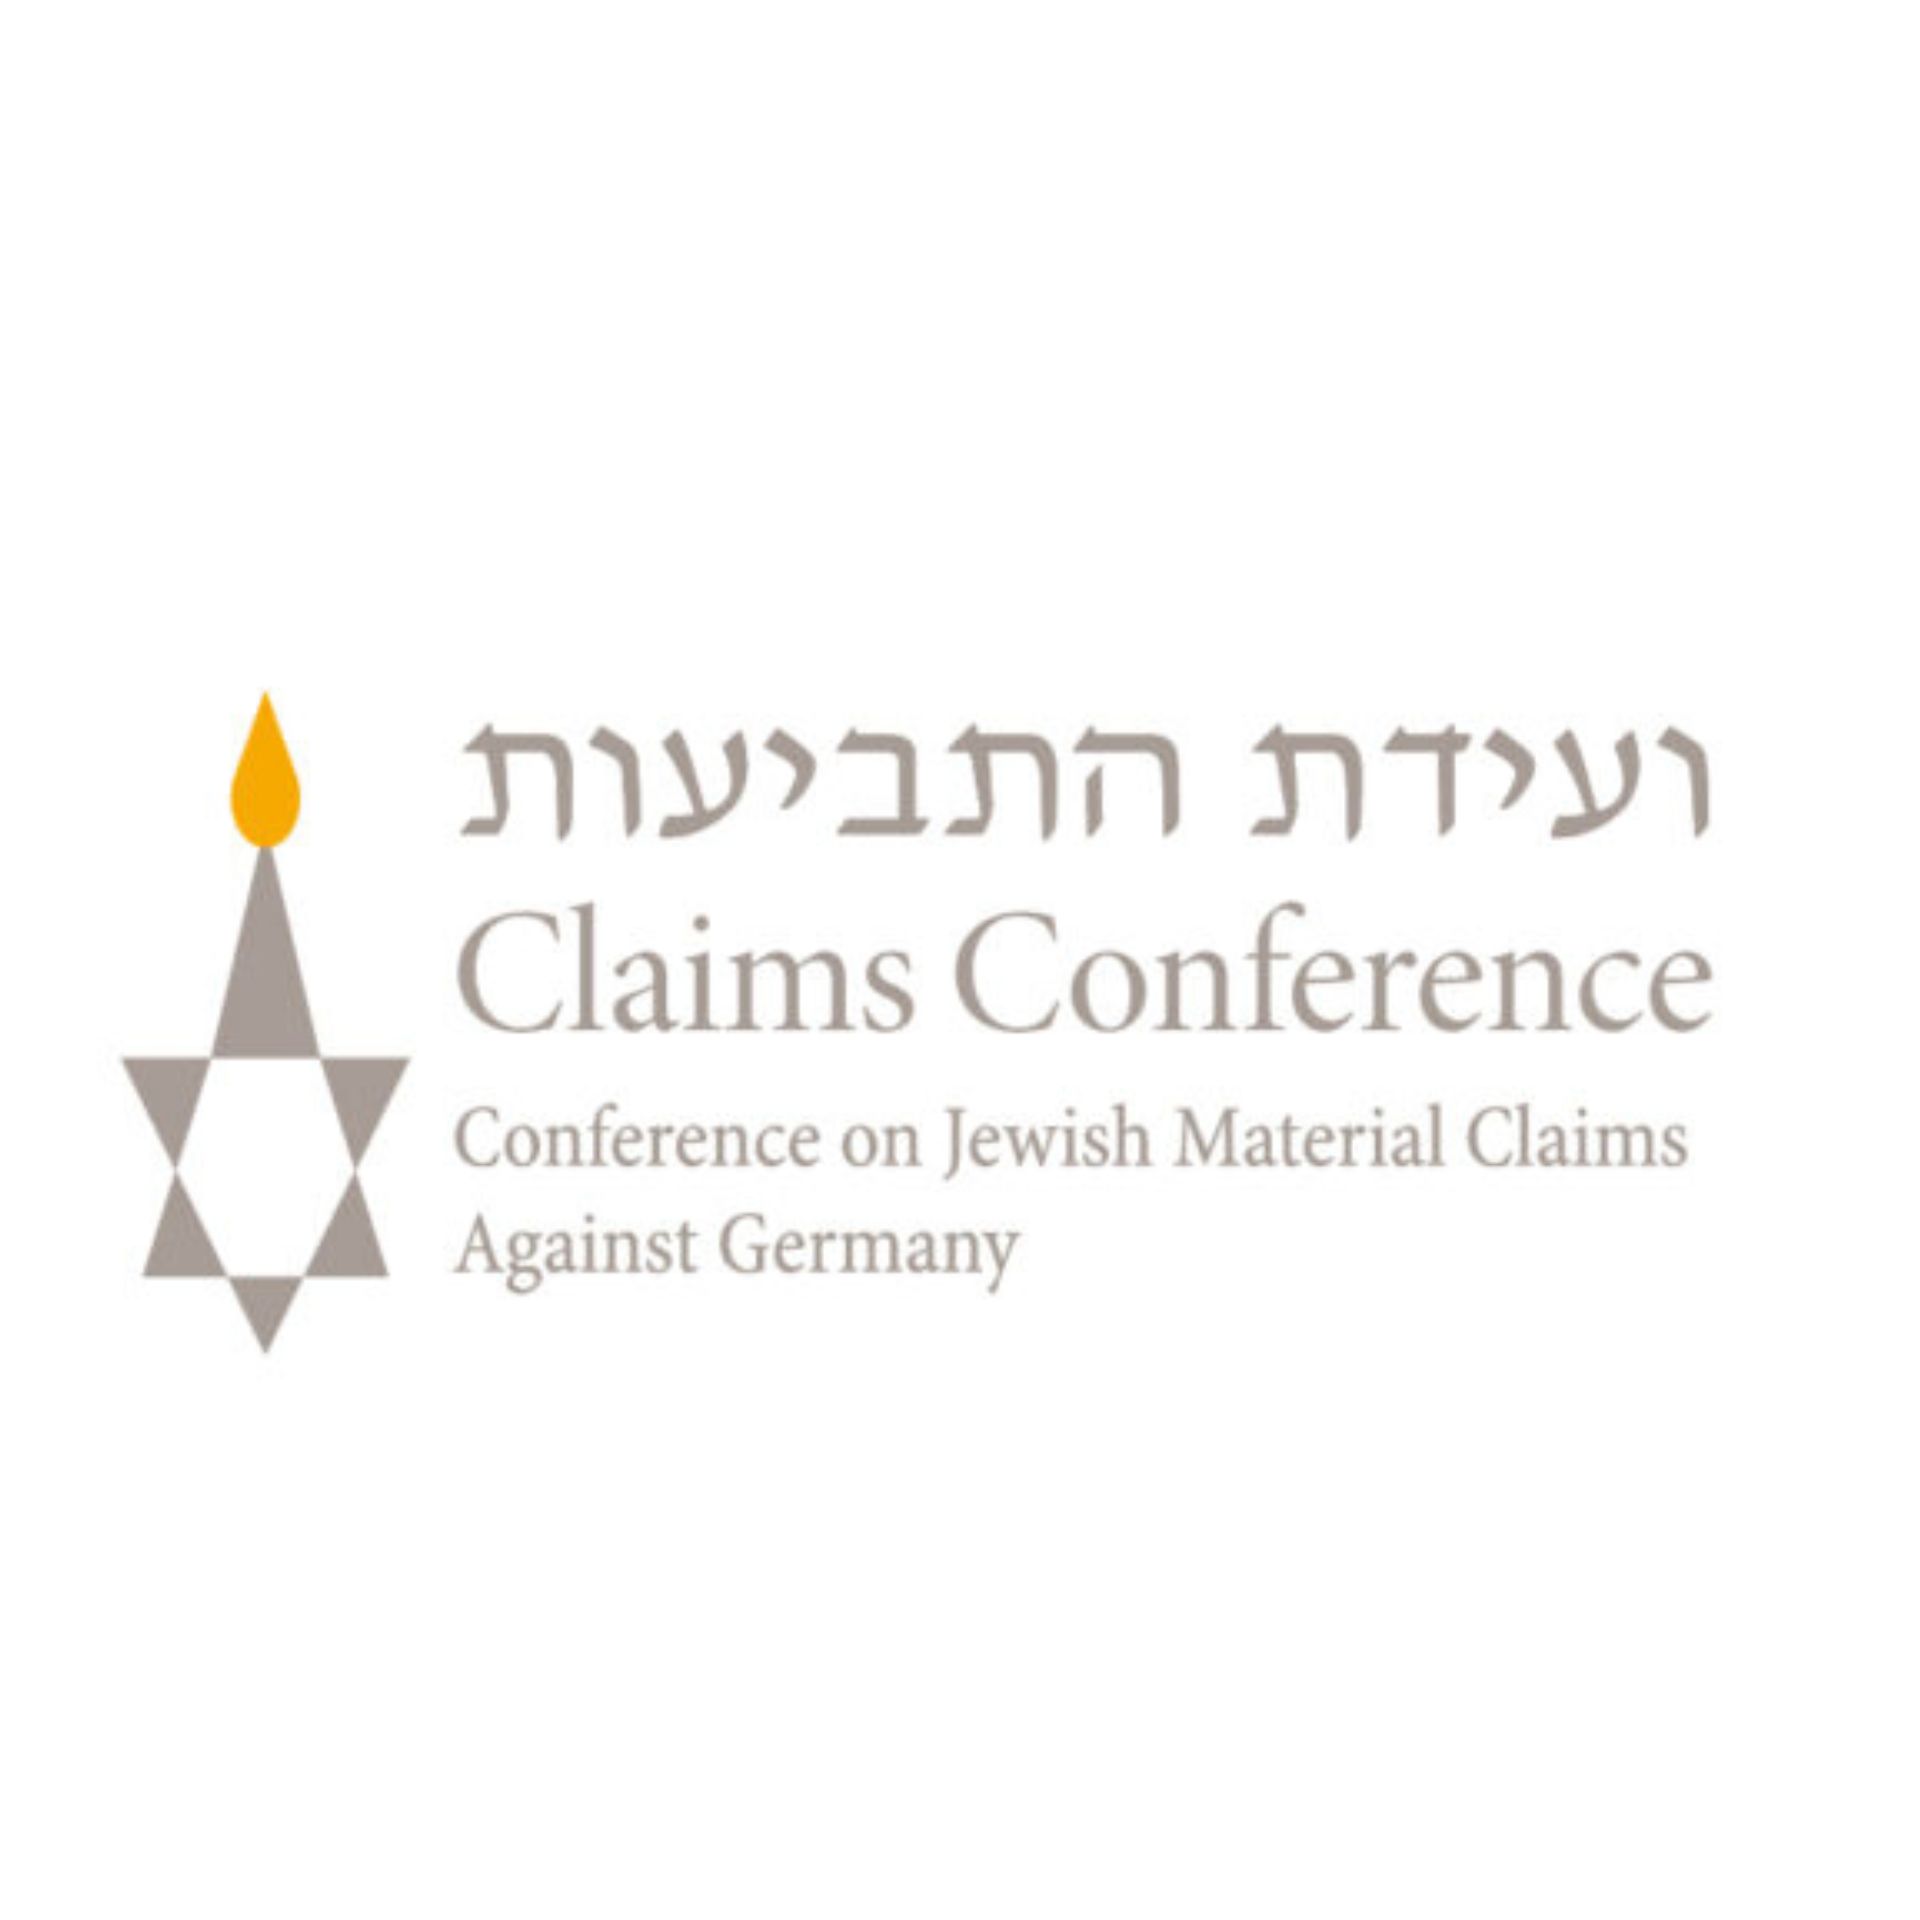 Conference on Jewish Material Claims Against Germany